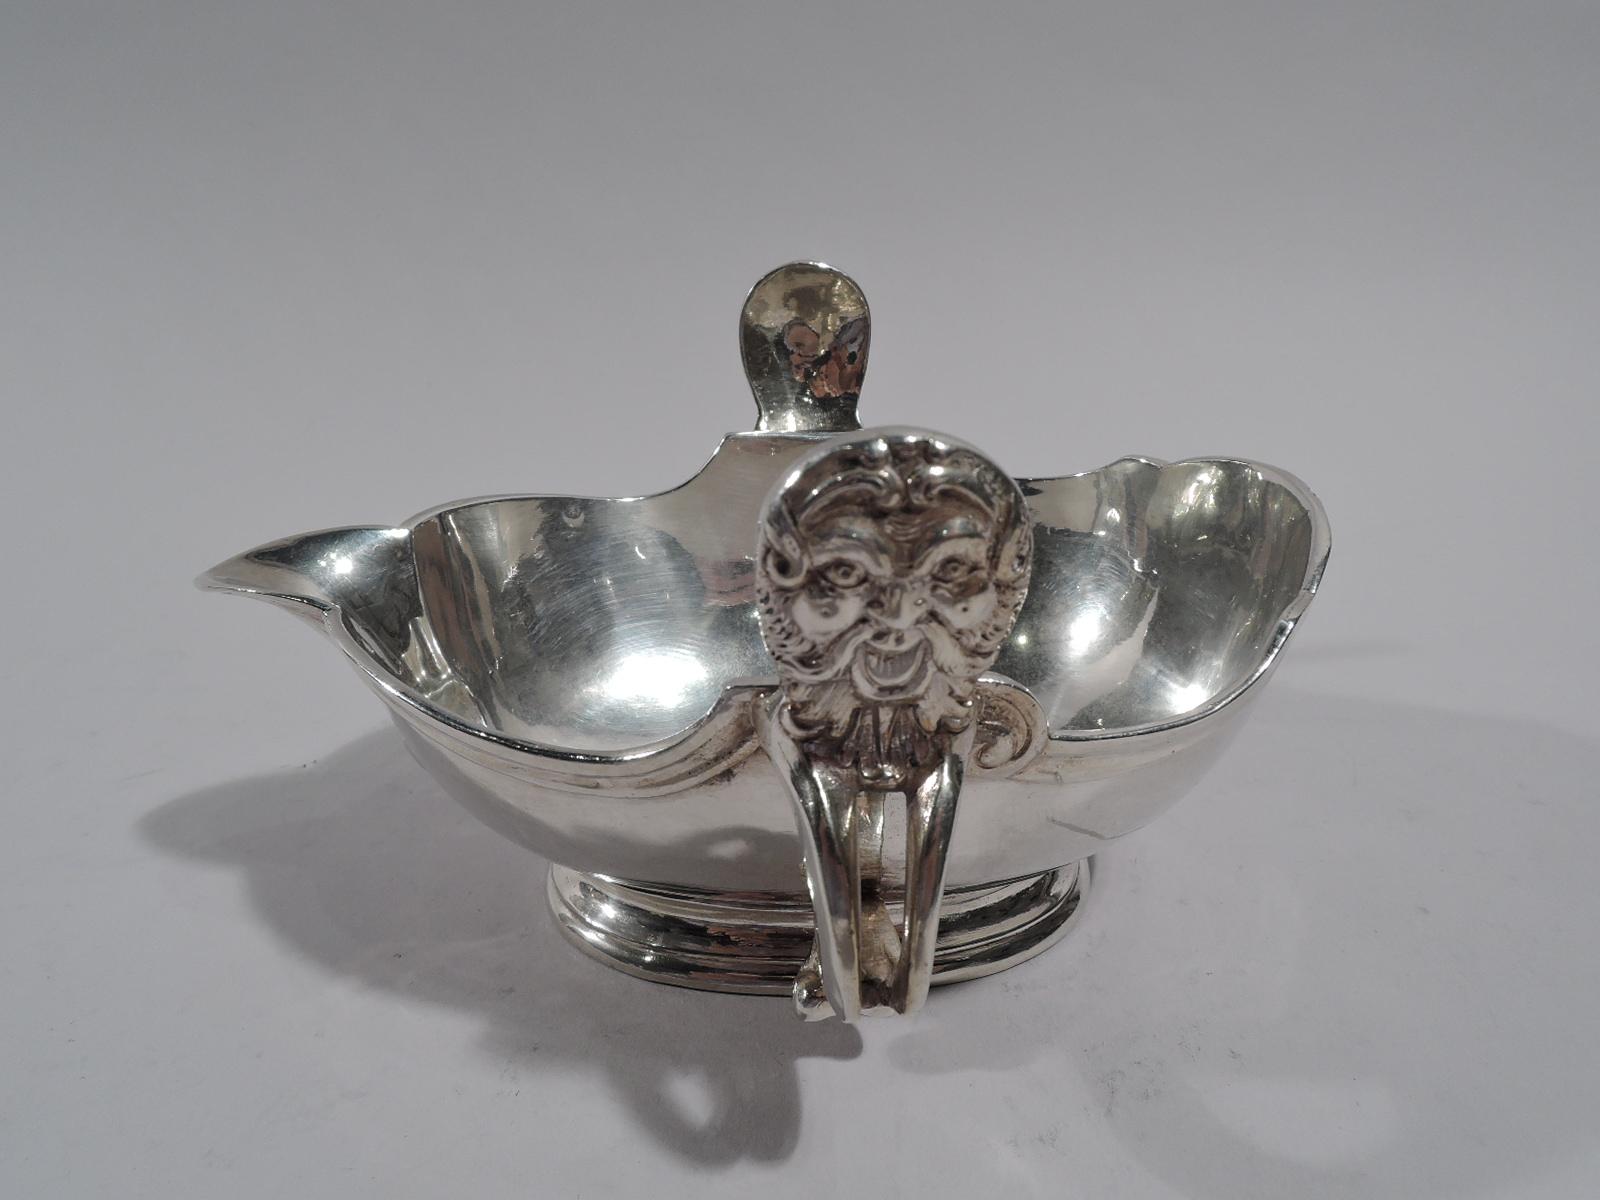 European silver sauce boat, circa 1900. Ovoid with fluted v-spout and scrolled monopodia side handles with lion heads. Molded curvilinear rim. Stepped oval foot. A nice revival piece in the 18th century style. Mark and pseudo-marks.

Overall